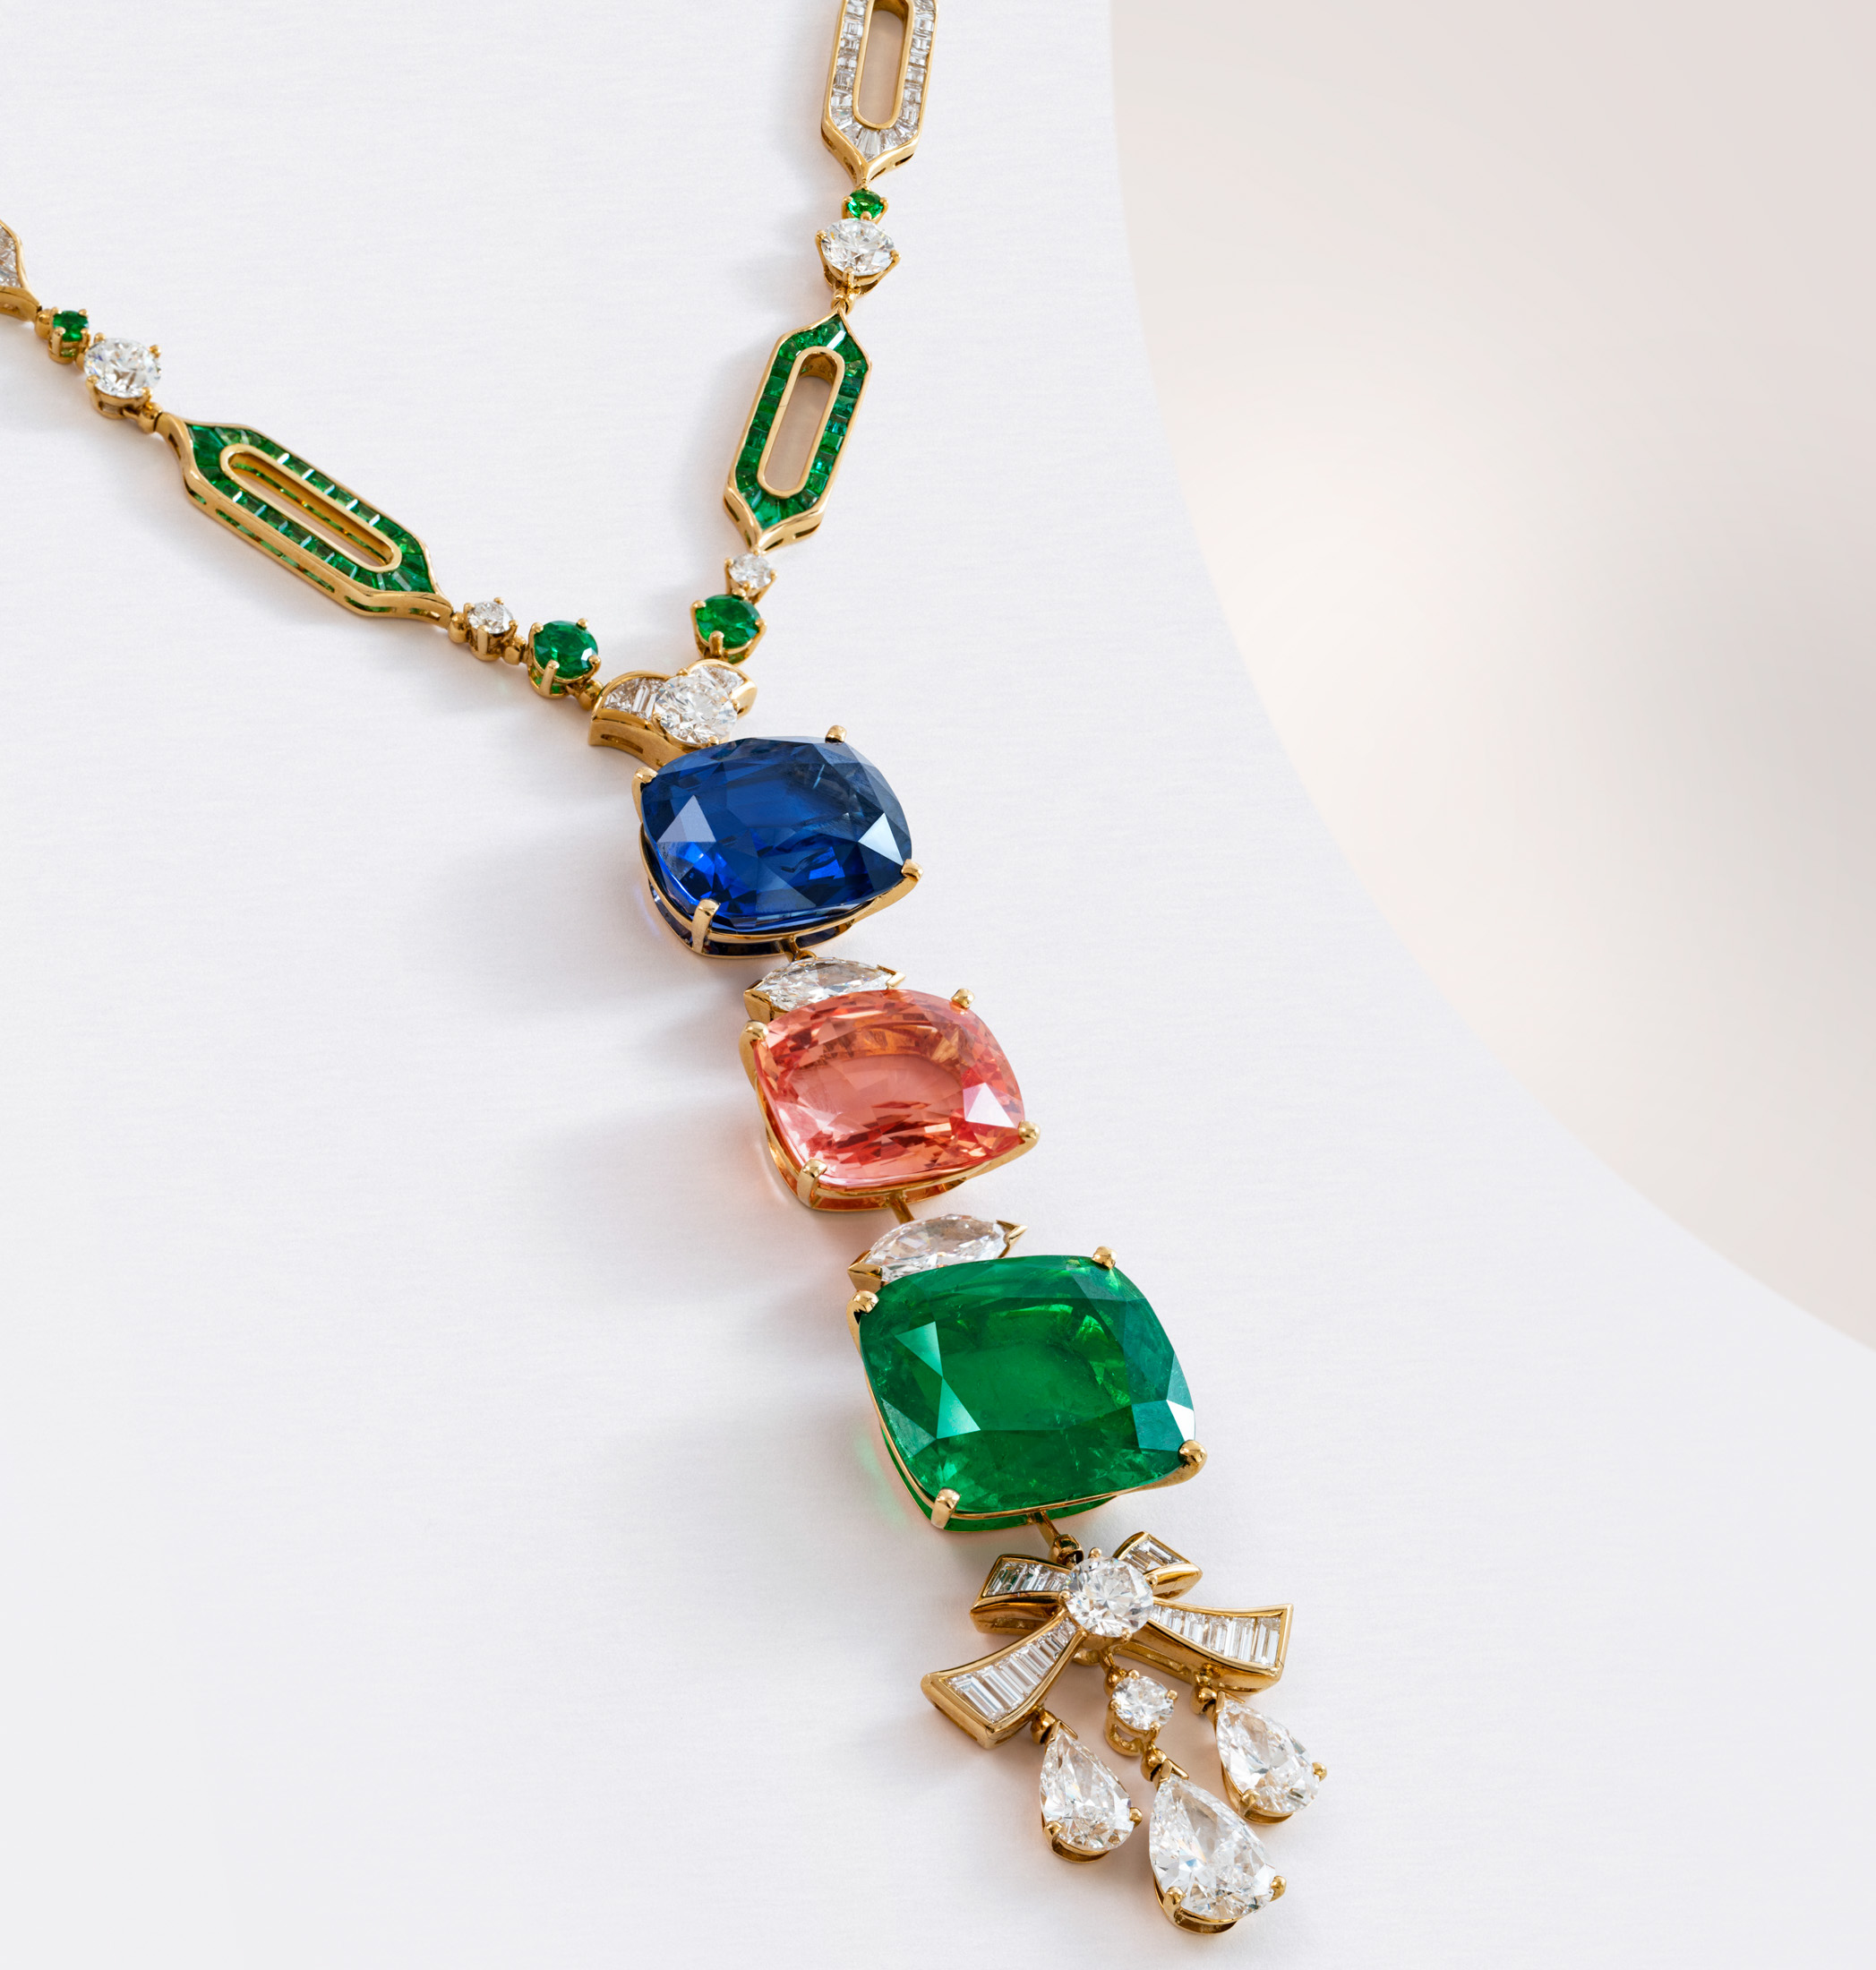 A Necklace Worth Half a Billion? The 5 Most Expensive Jewels from